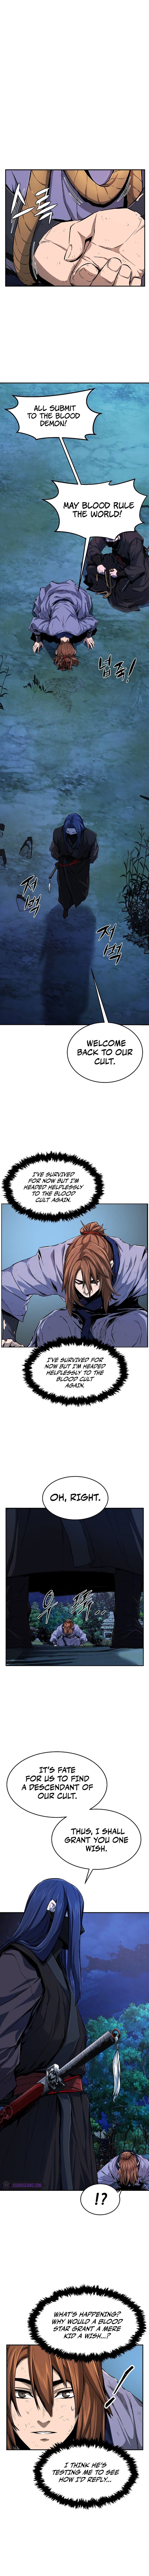 Absolute Sword Sense Chapter 4 Page 1